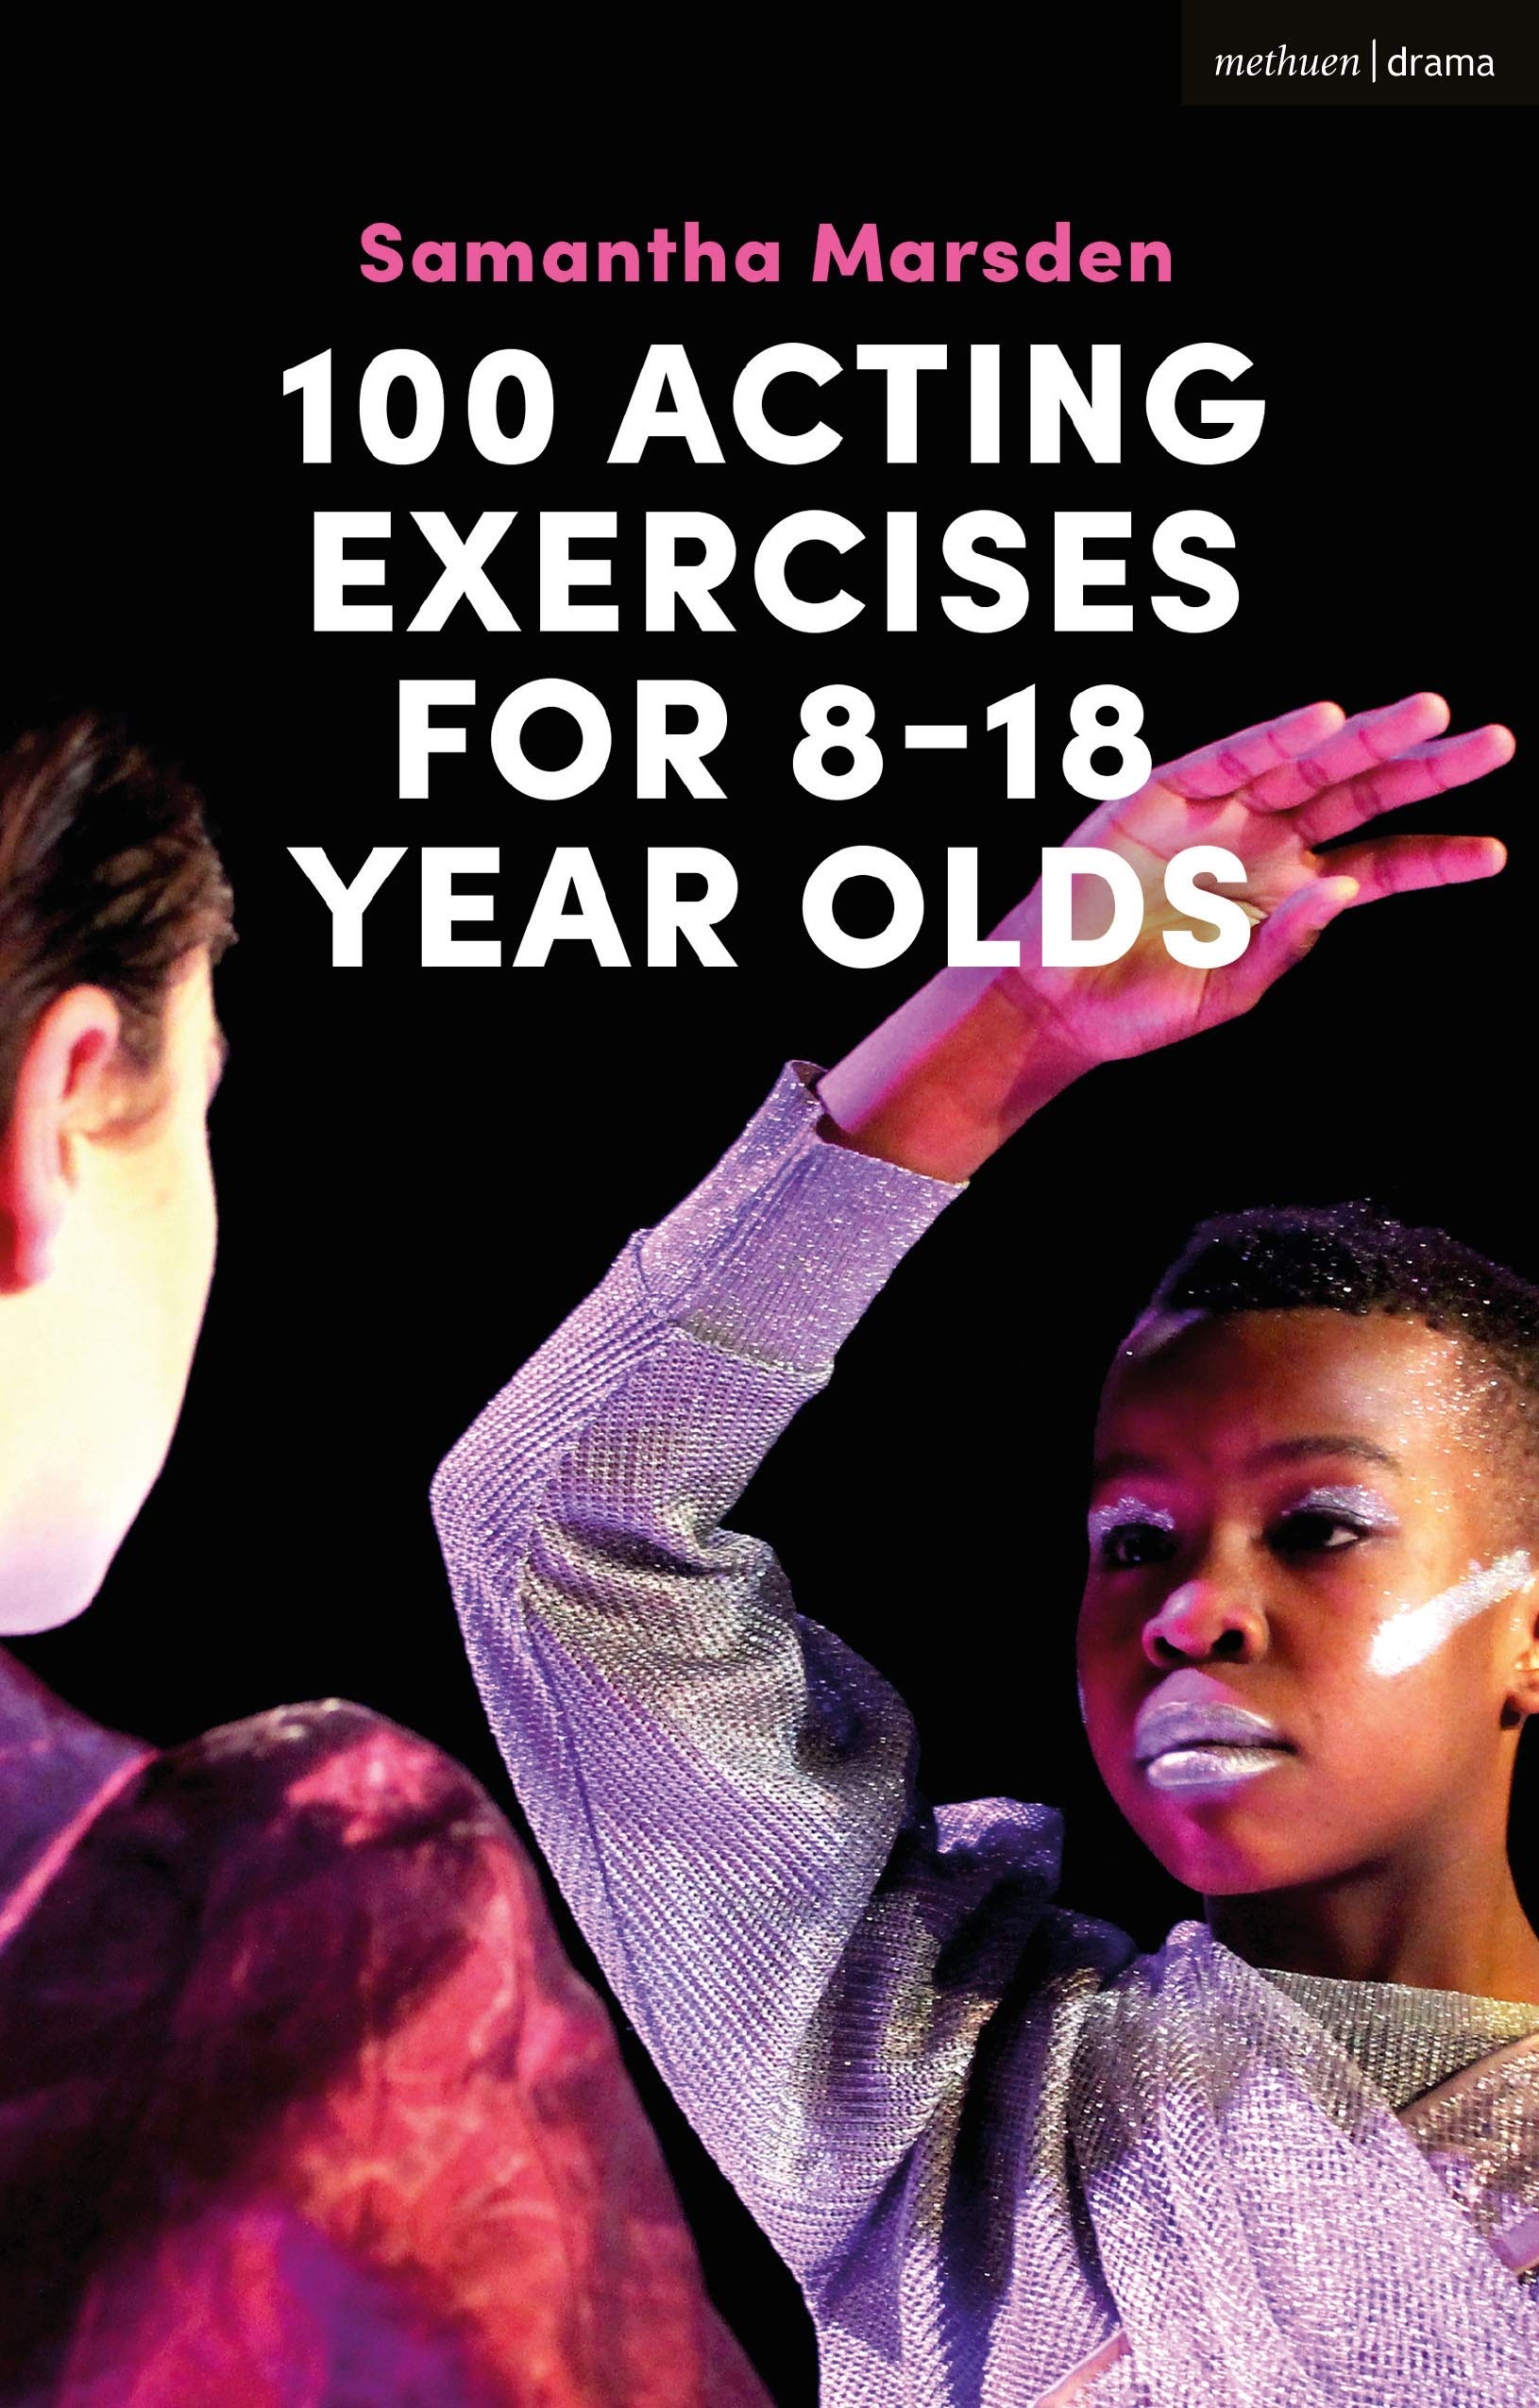 100 Acting Exercises for 8 - 18 Year Olds | Samantha Marsden